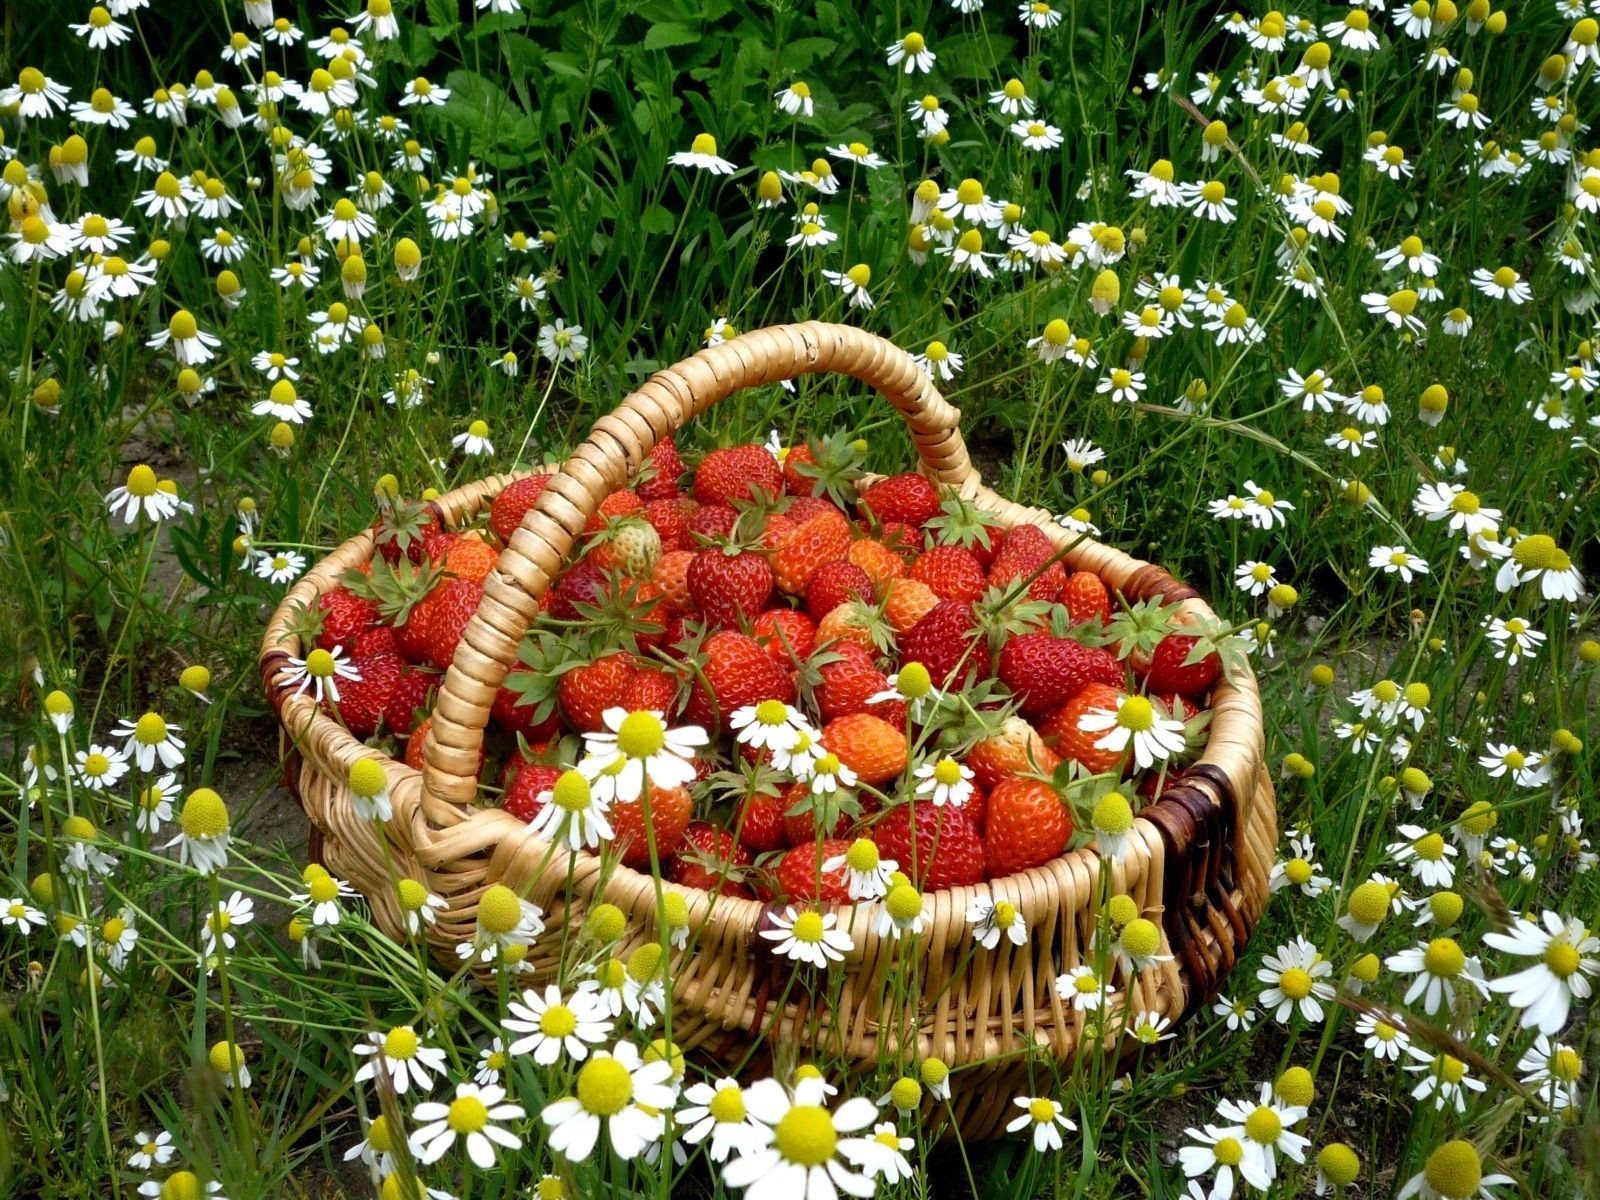 Basket of strawberries among daisies wallpapers and images 